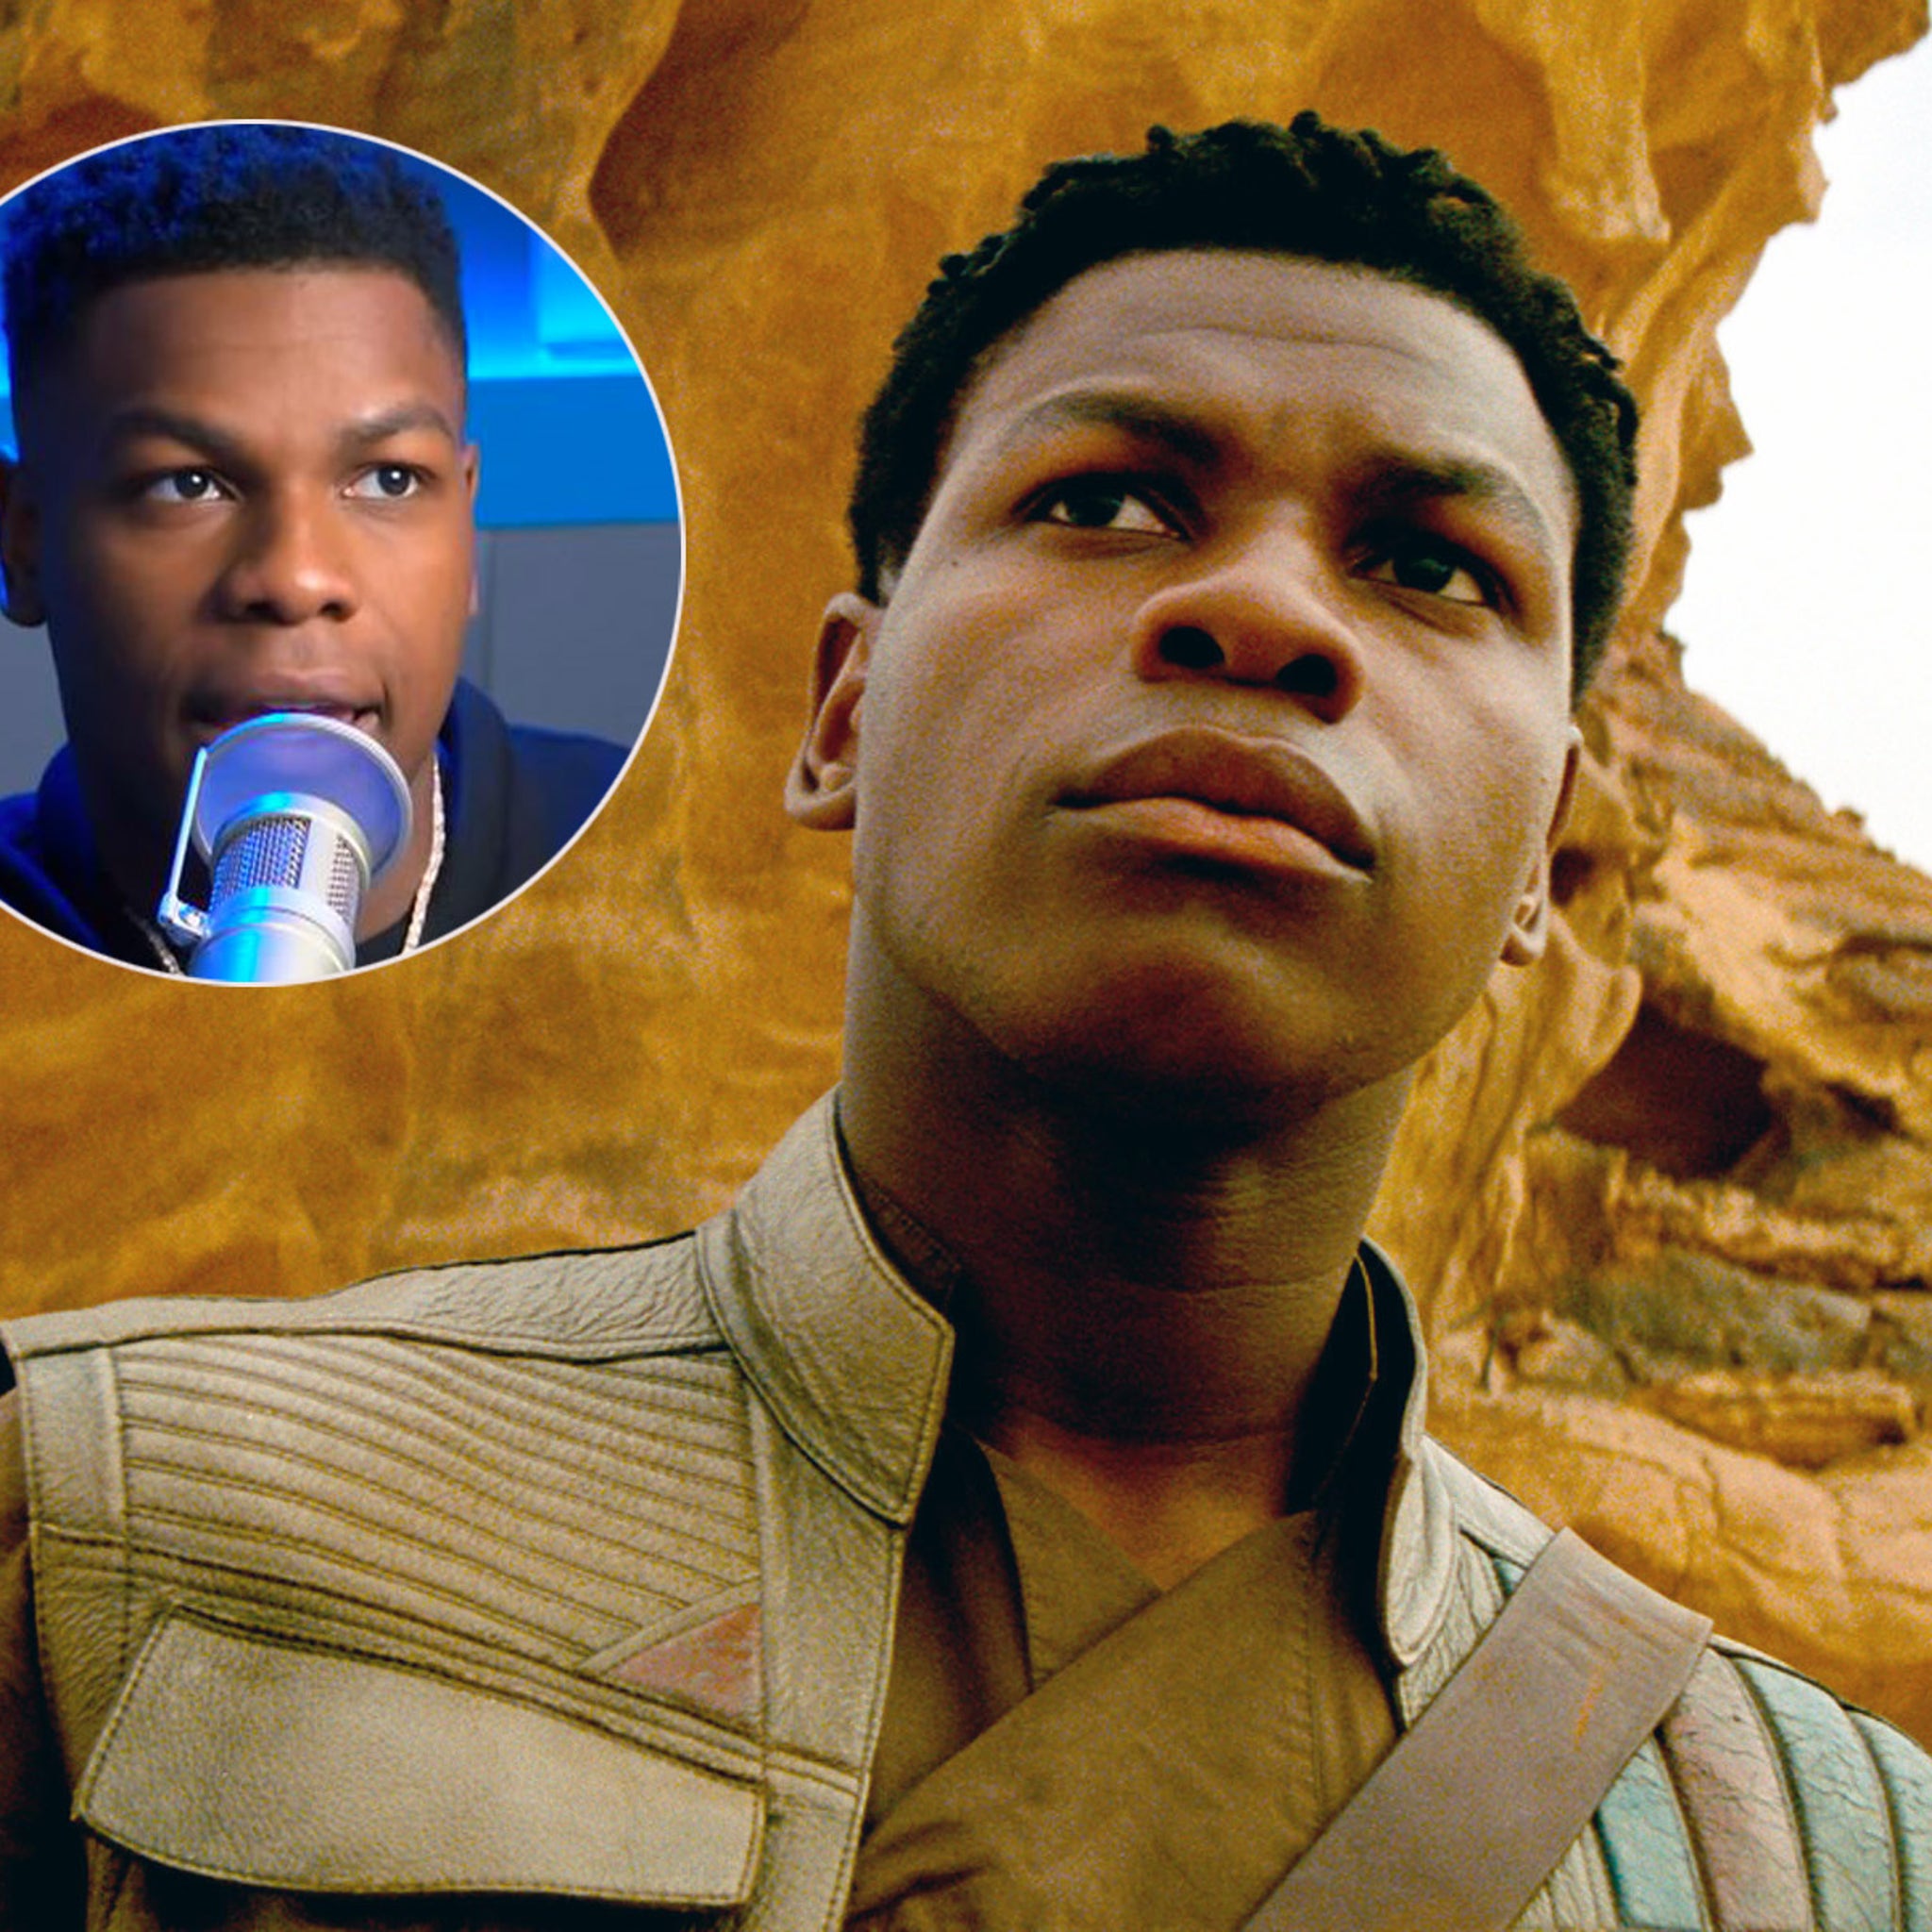 Star Wars' fans are attacking actors of color again. This time: Moses Ingram